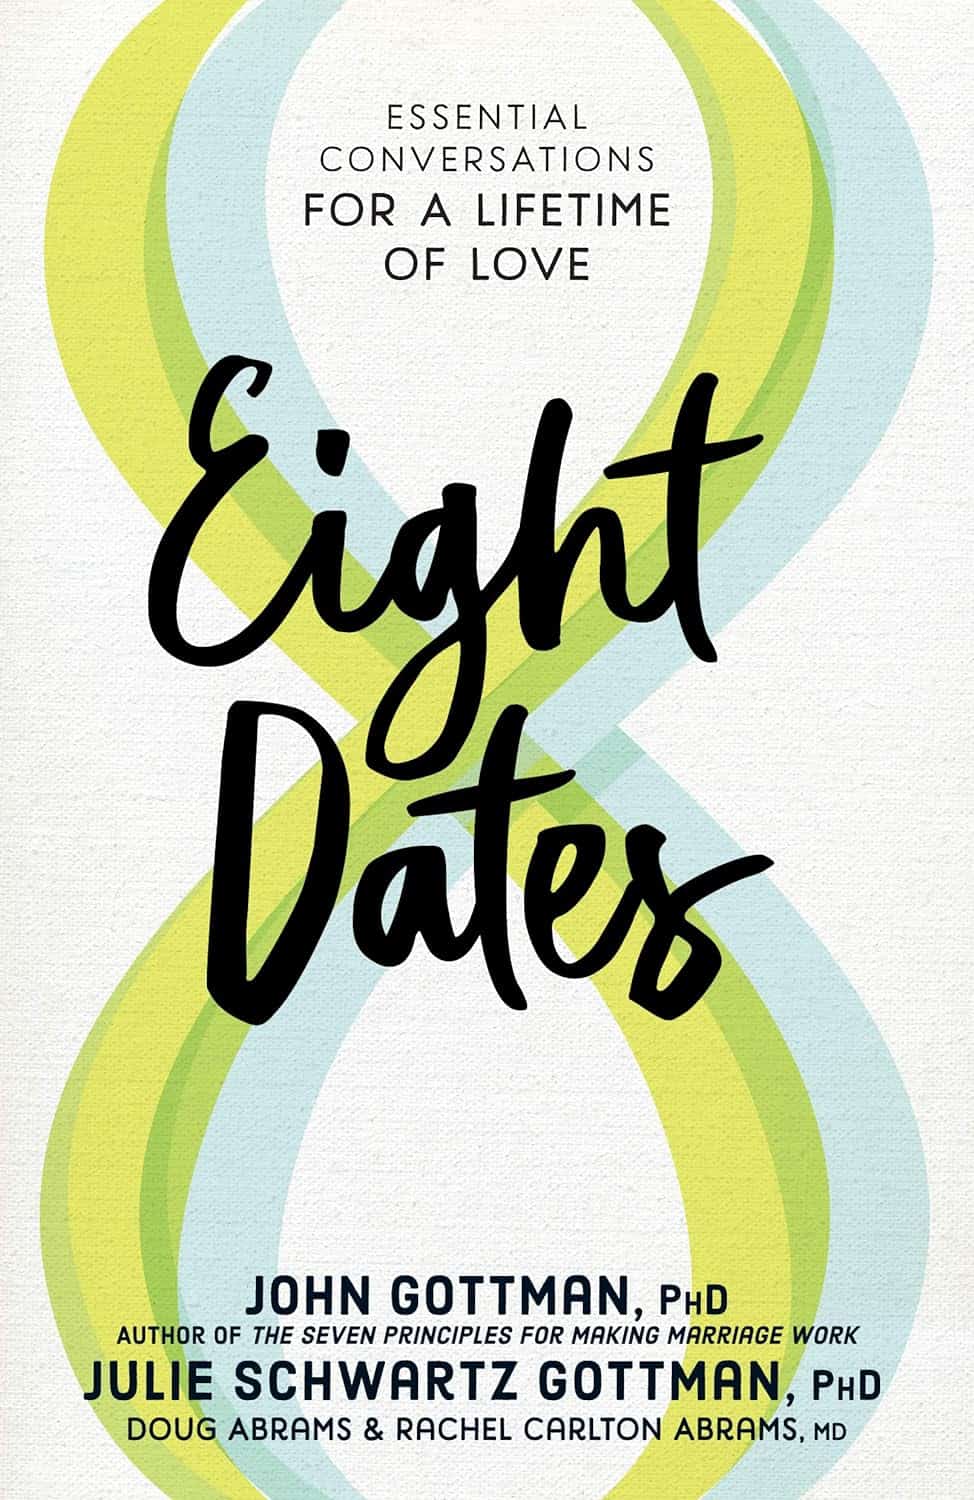 Eight Dates Essential Conversations for a Lifetime of Love by John Gottman